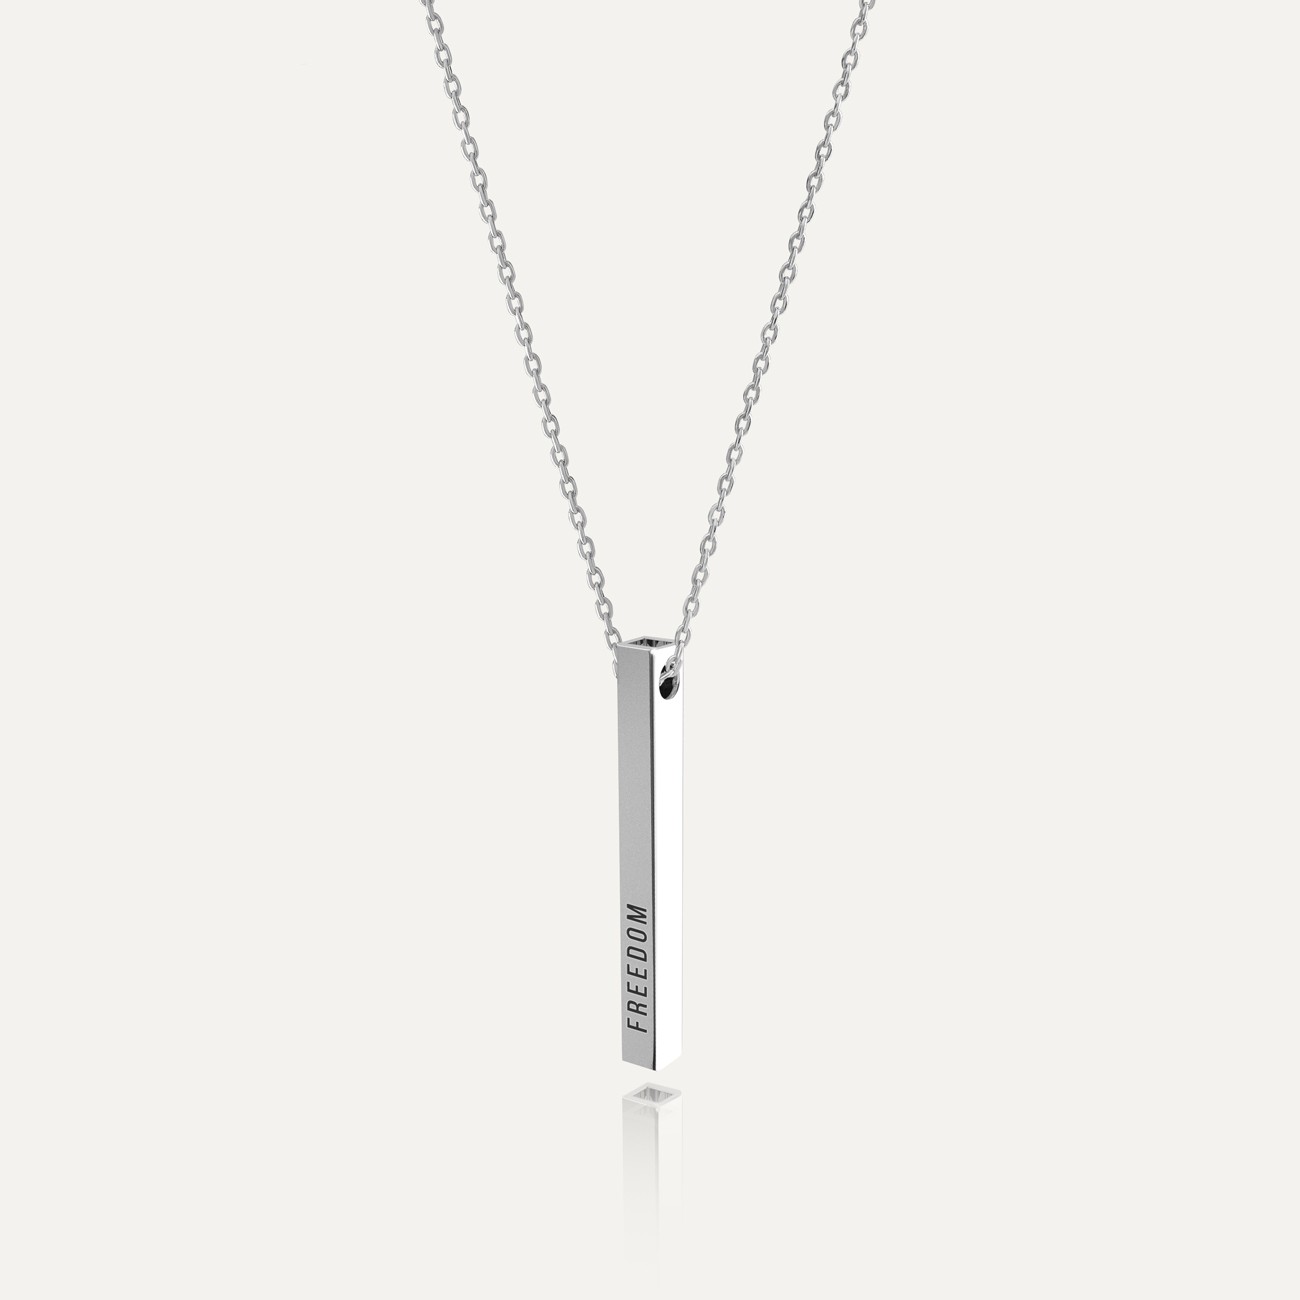 RECTANGLE TUBE 2,7 cm necklace 925 with engraving